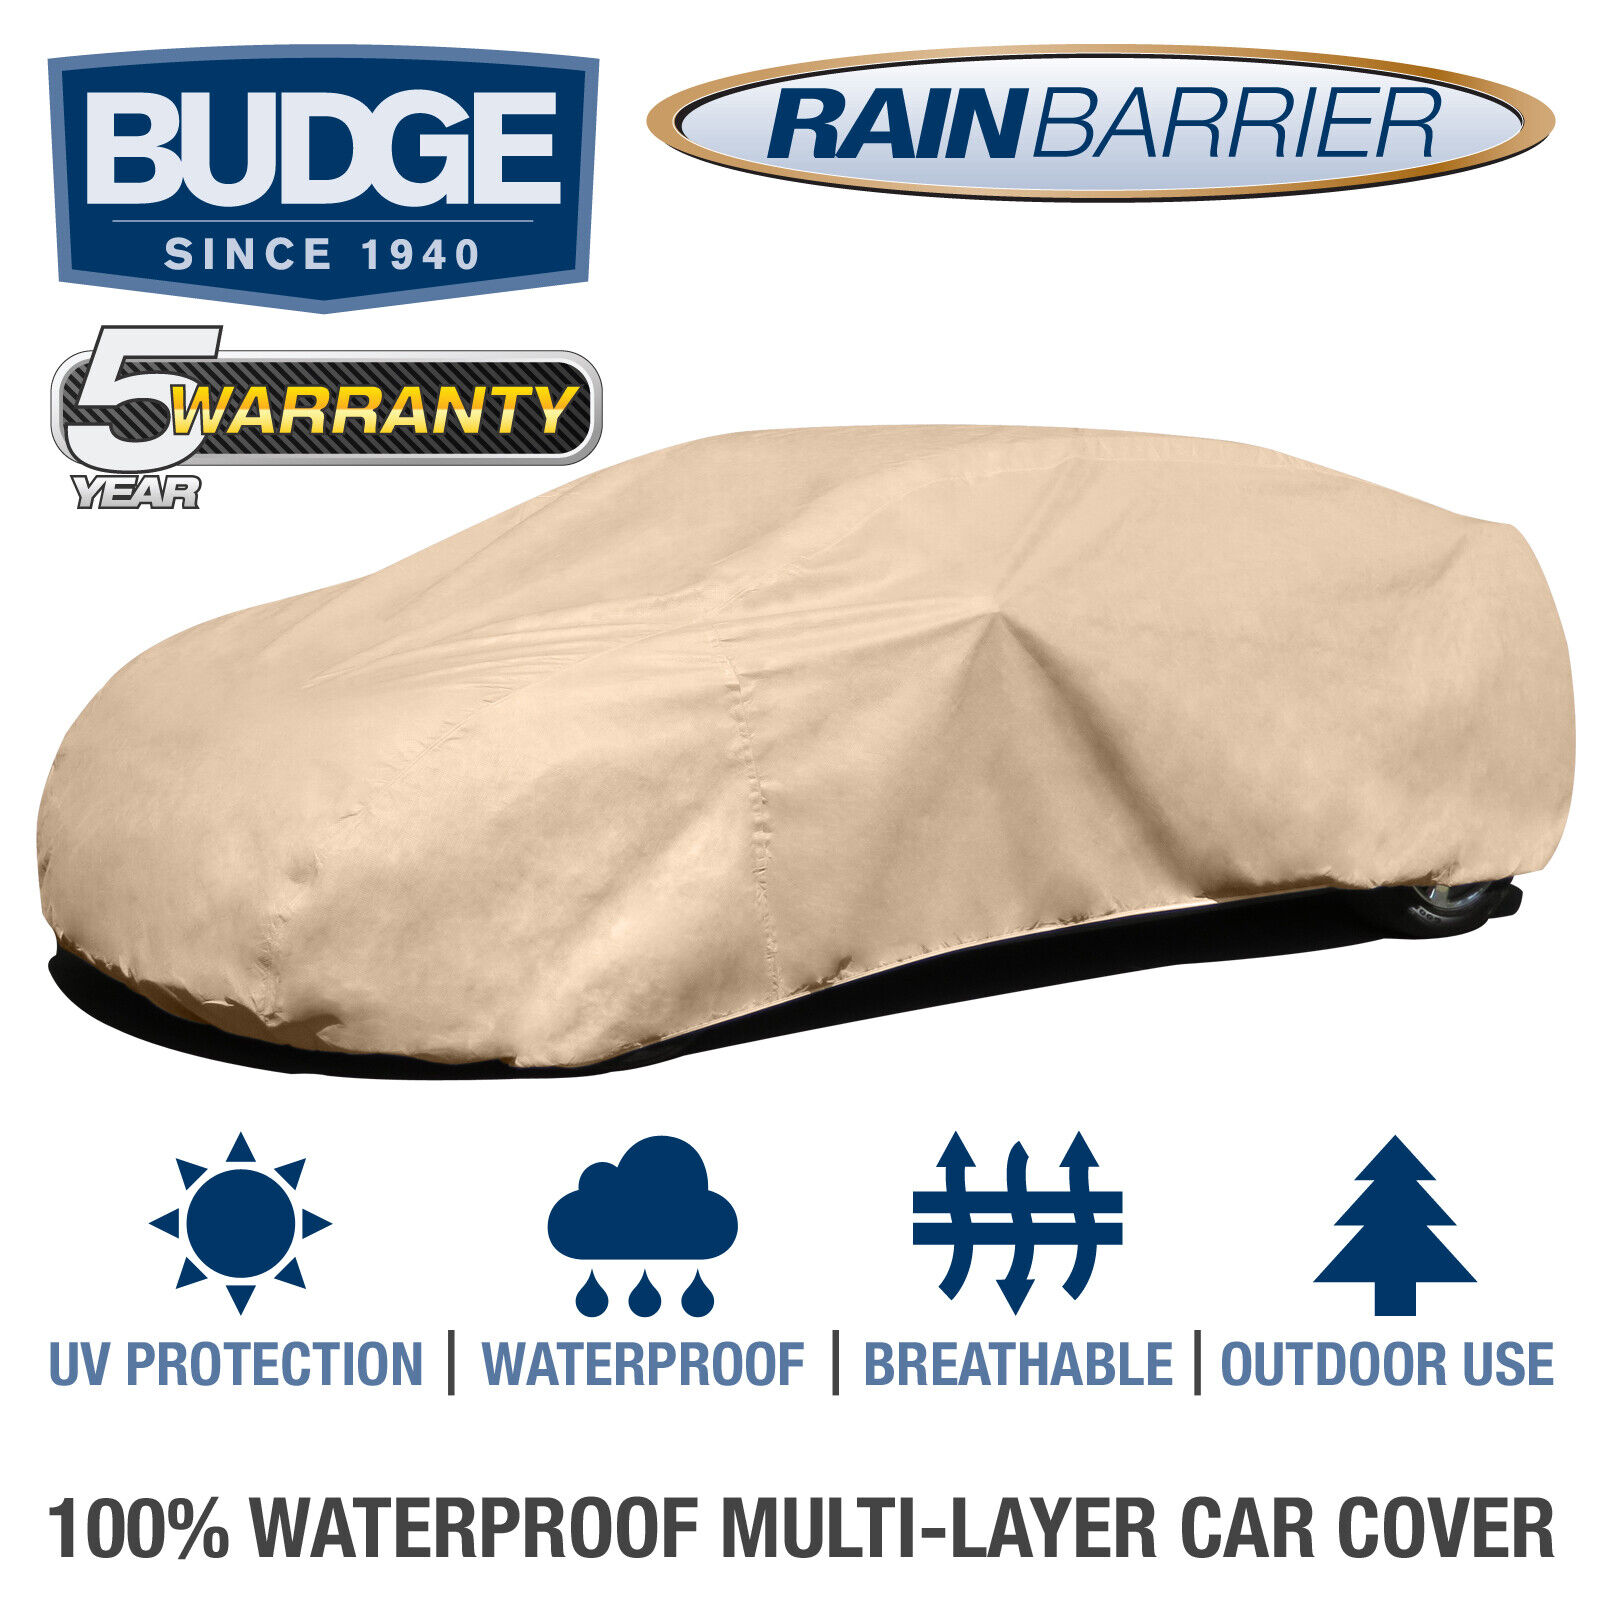 Budge Rain Barrier Car Cover Fits Pontiac Tempest 1967| Waterproof | Breathable